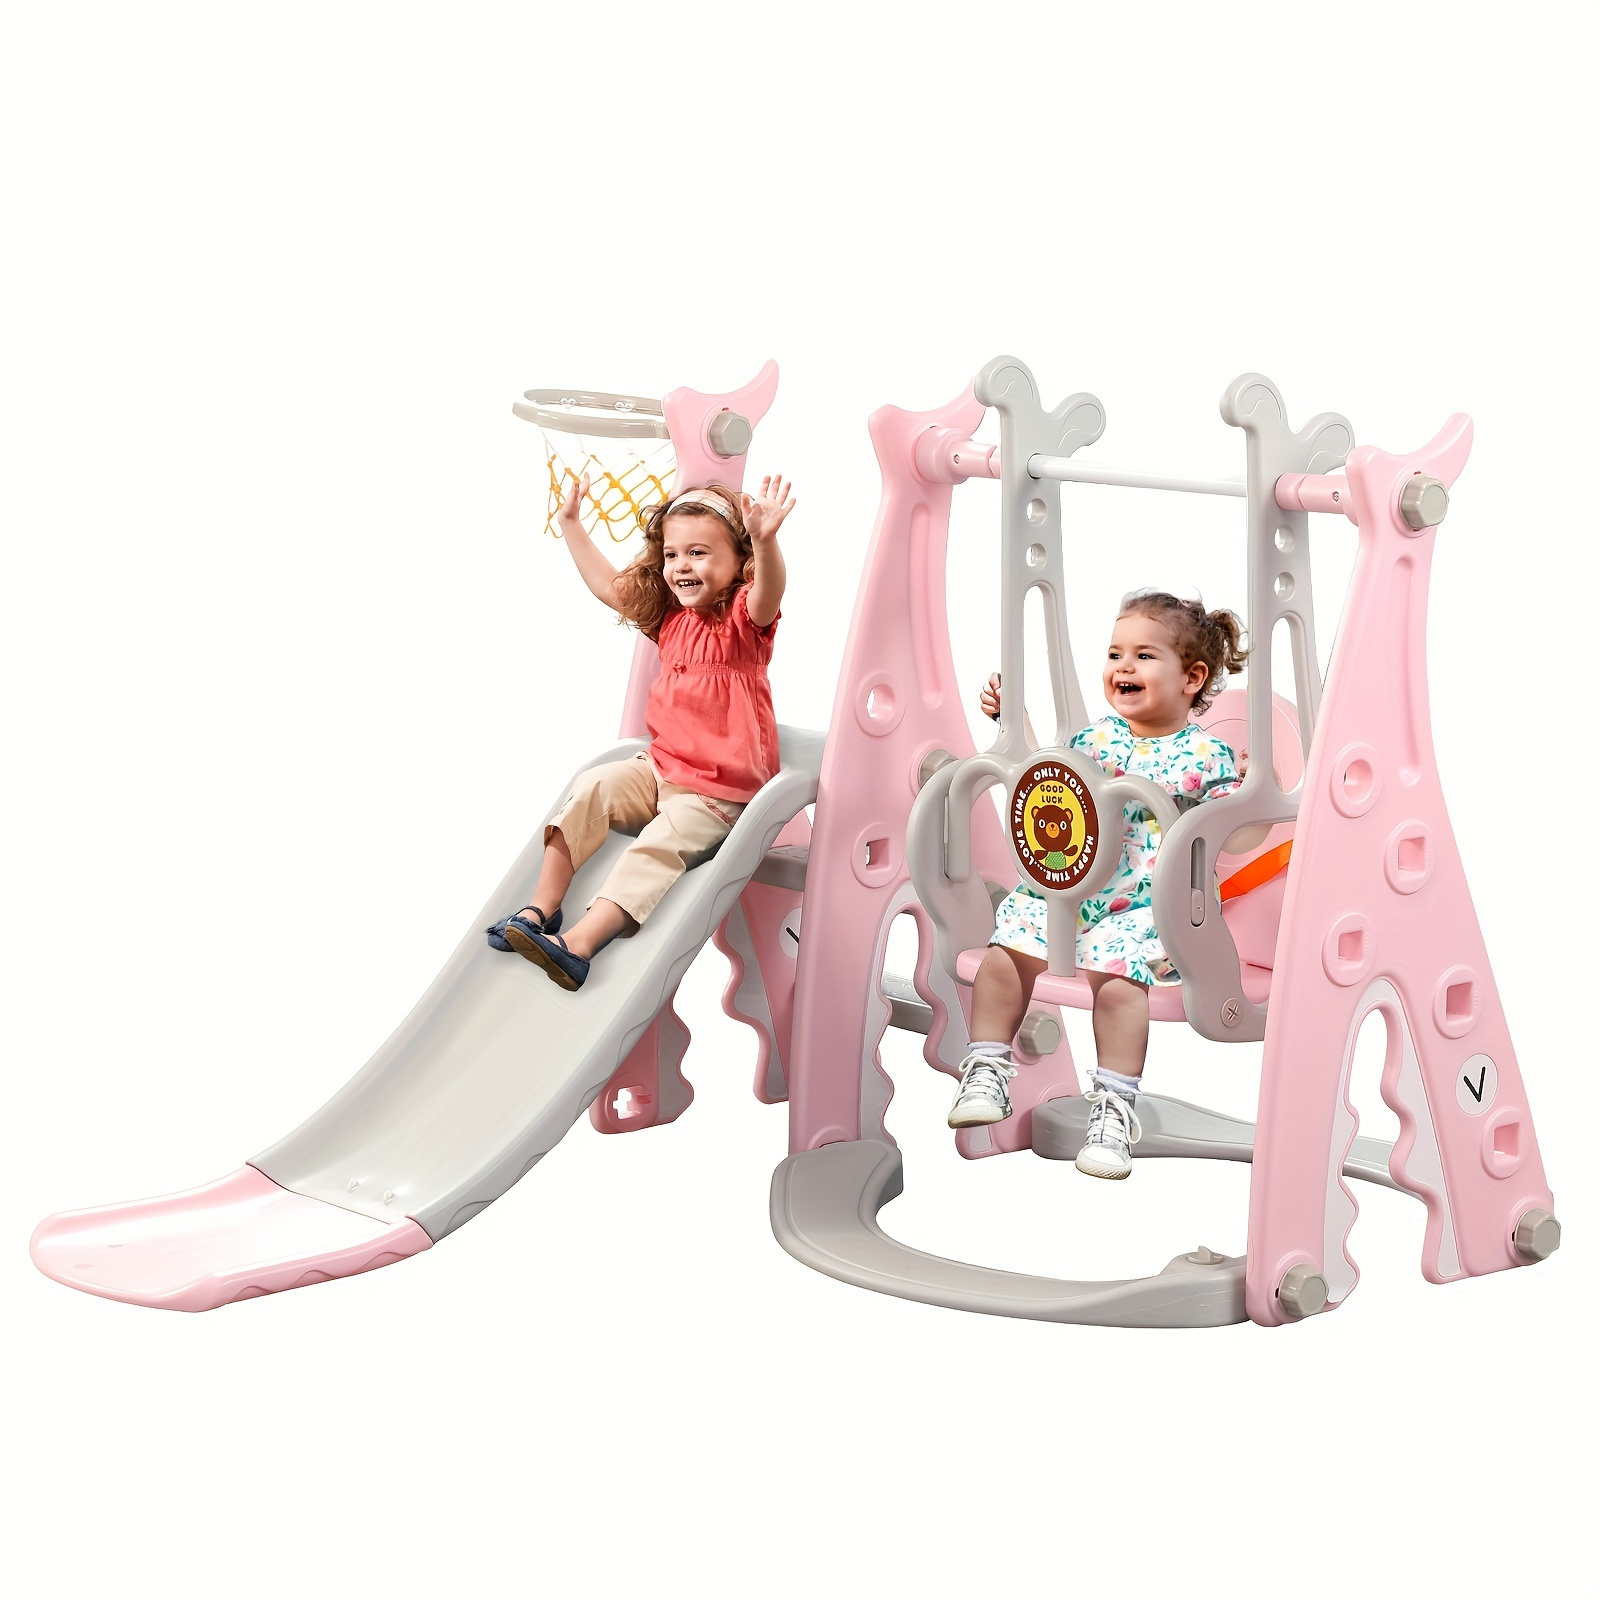 

Toddlers Slide And Swing Set 4 In 1 Kids Freestanding Climber Slide Playset For Boys Girls With Basketball Hoop Extra Long Slide Easy Set Up Baby Playset